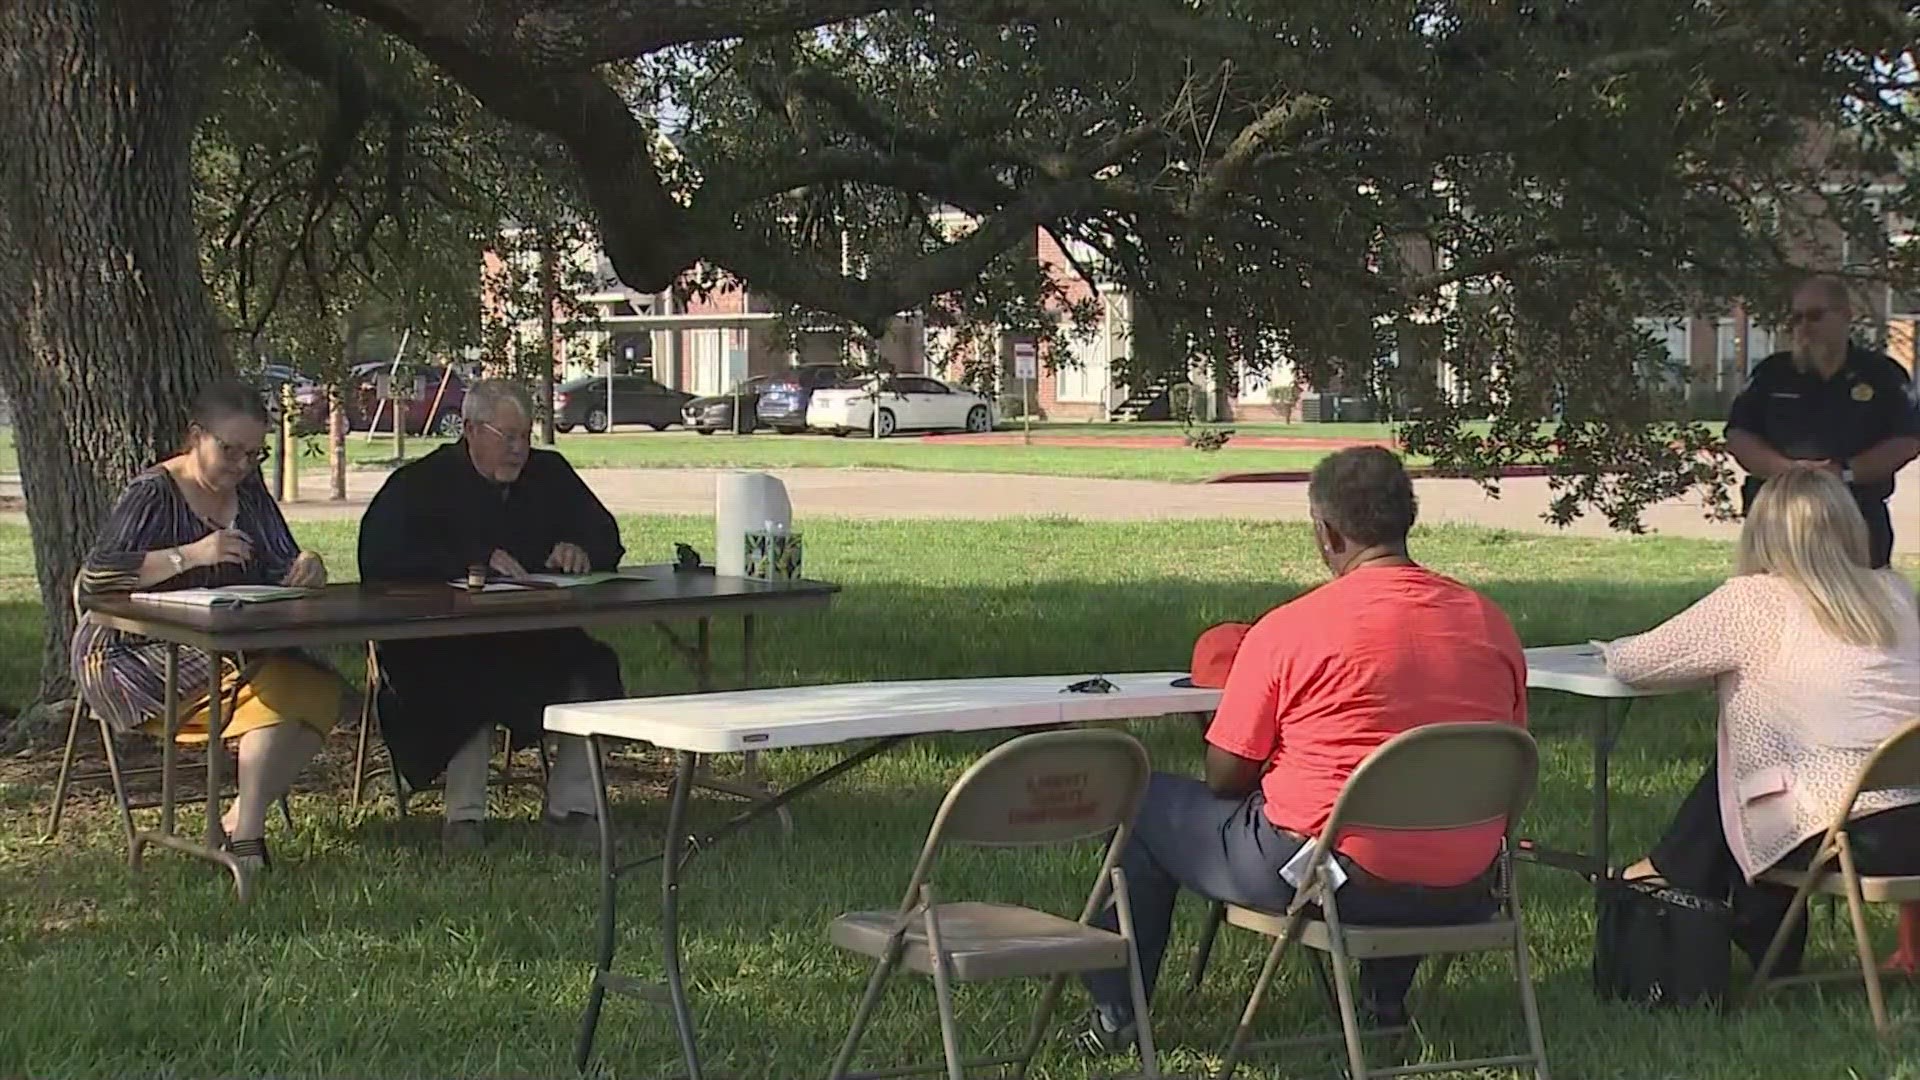 The was holding hearing under a tree because the annex where he normally holds court had flooded.